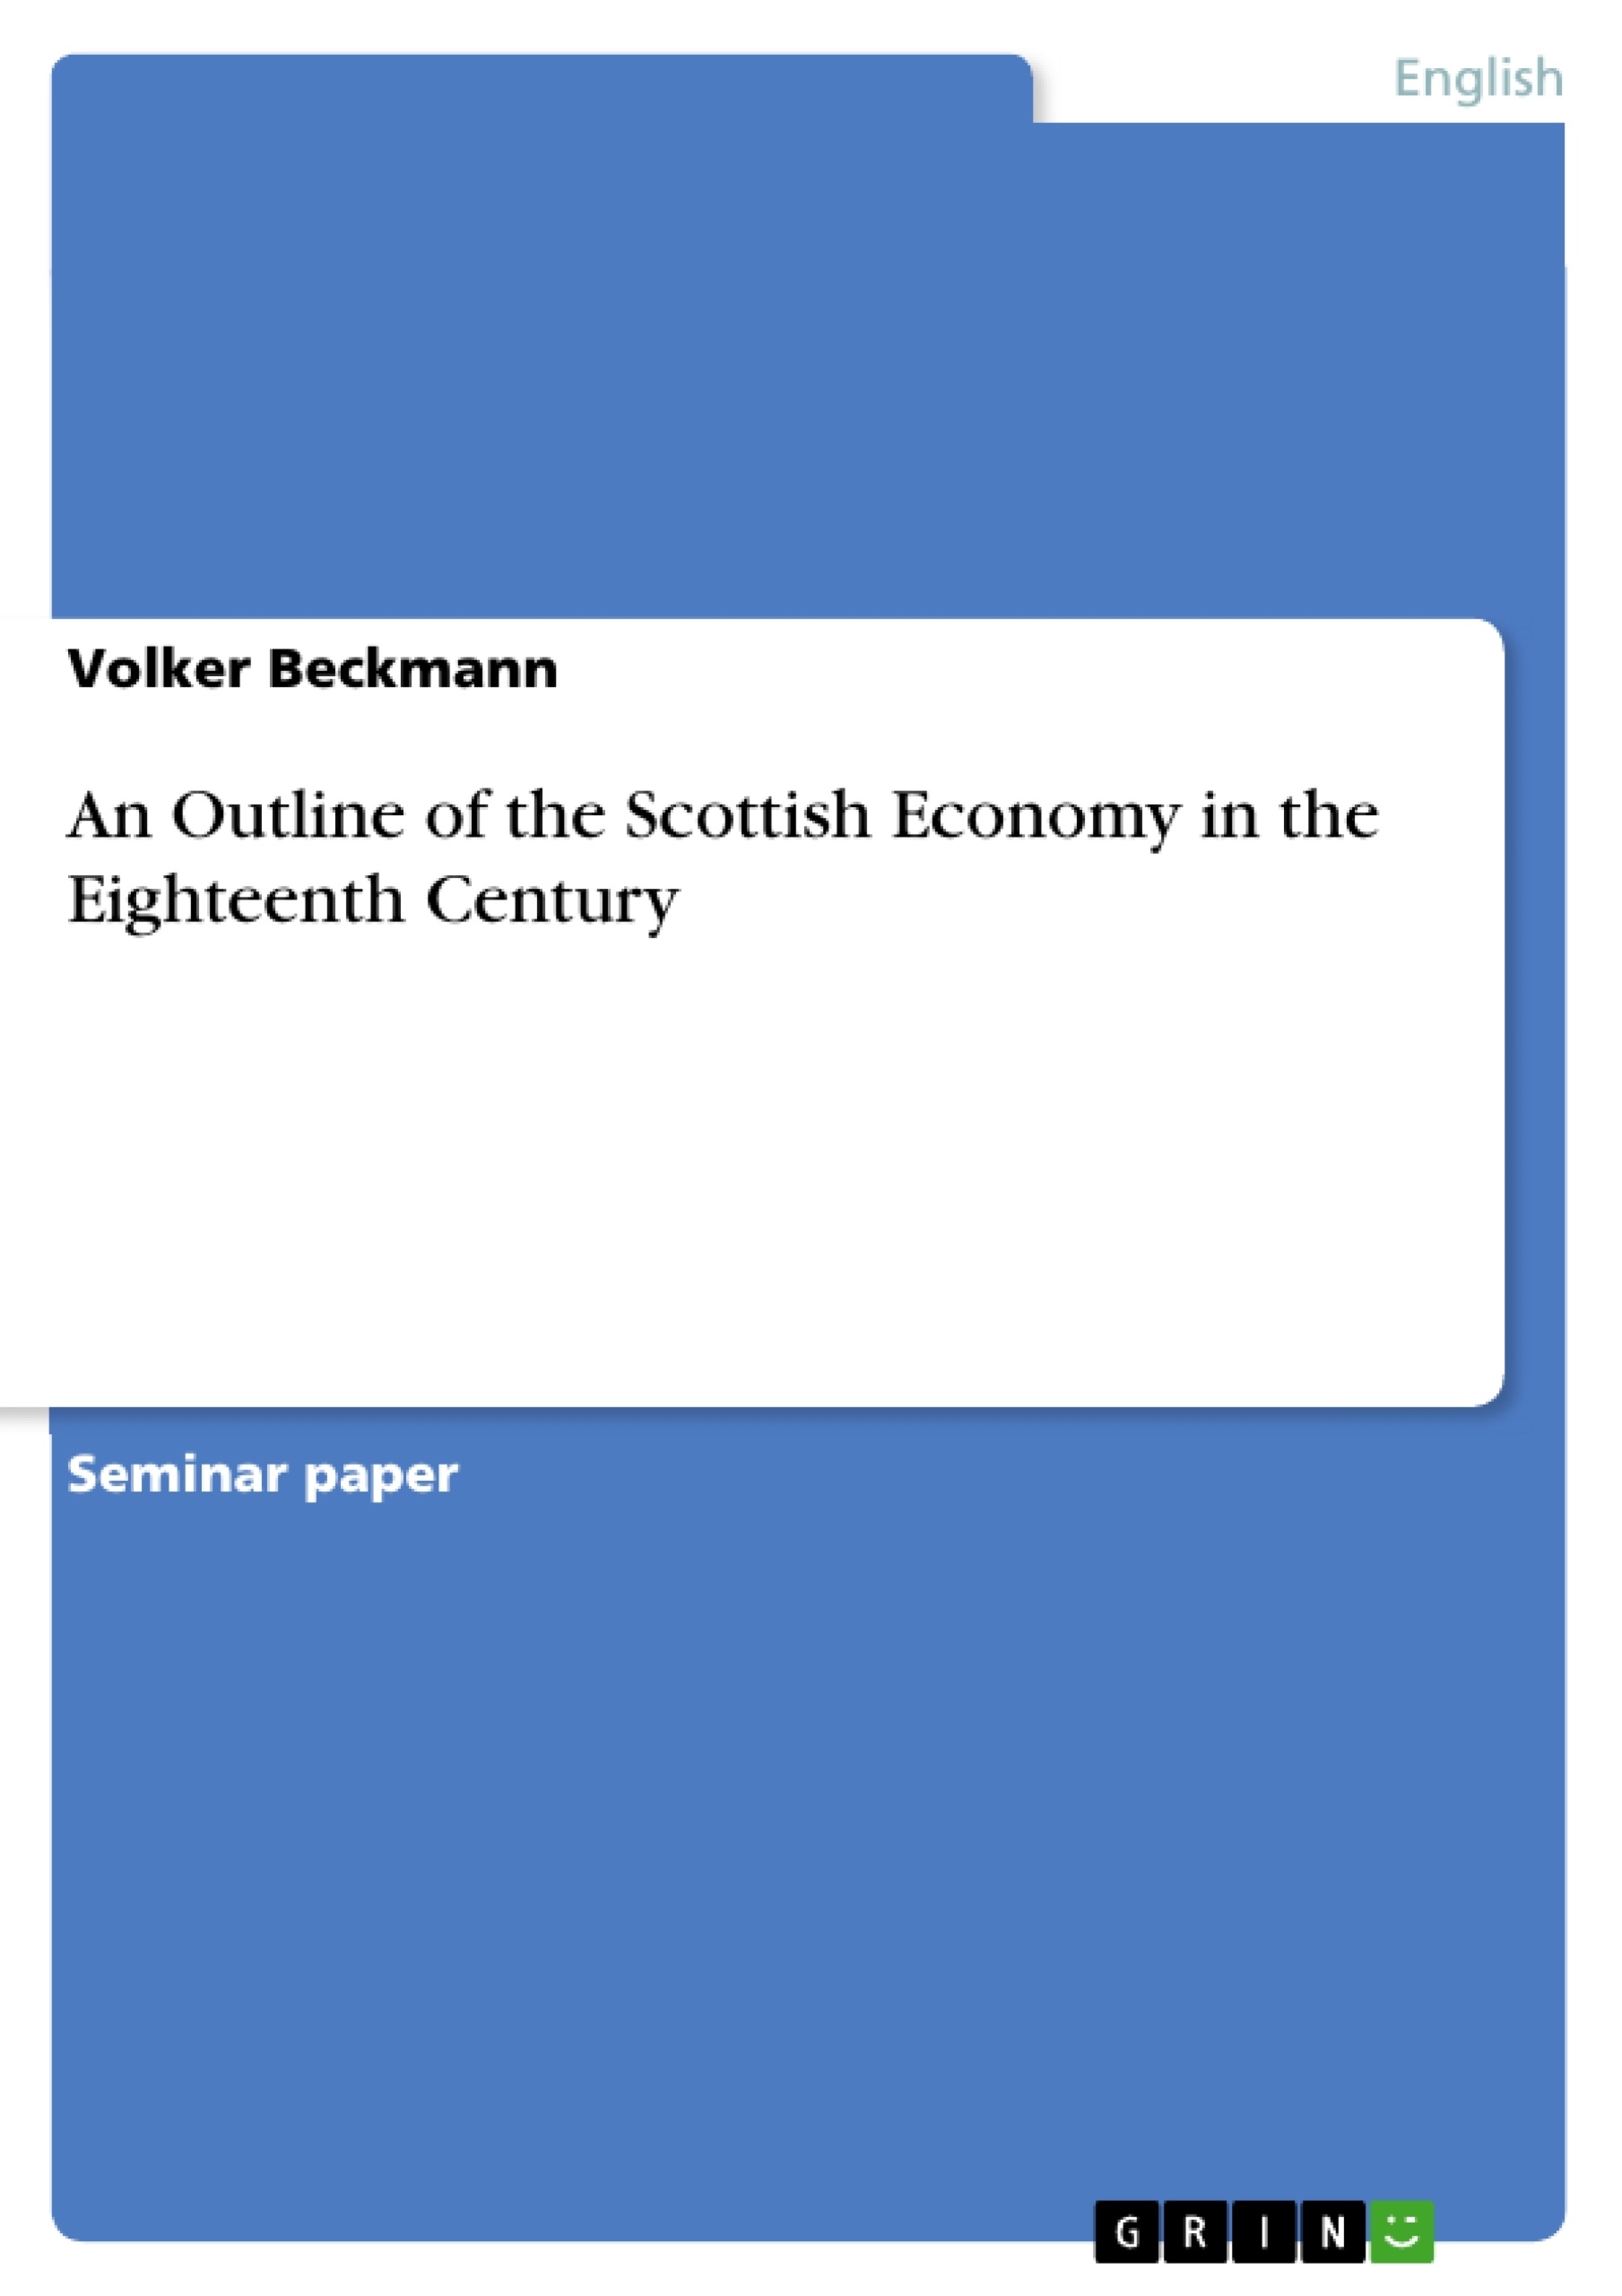 Título: An Outline of the Scottish Economy in the Eighteenth Century